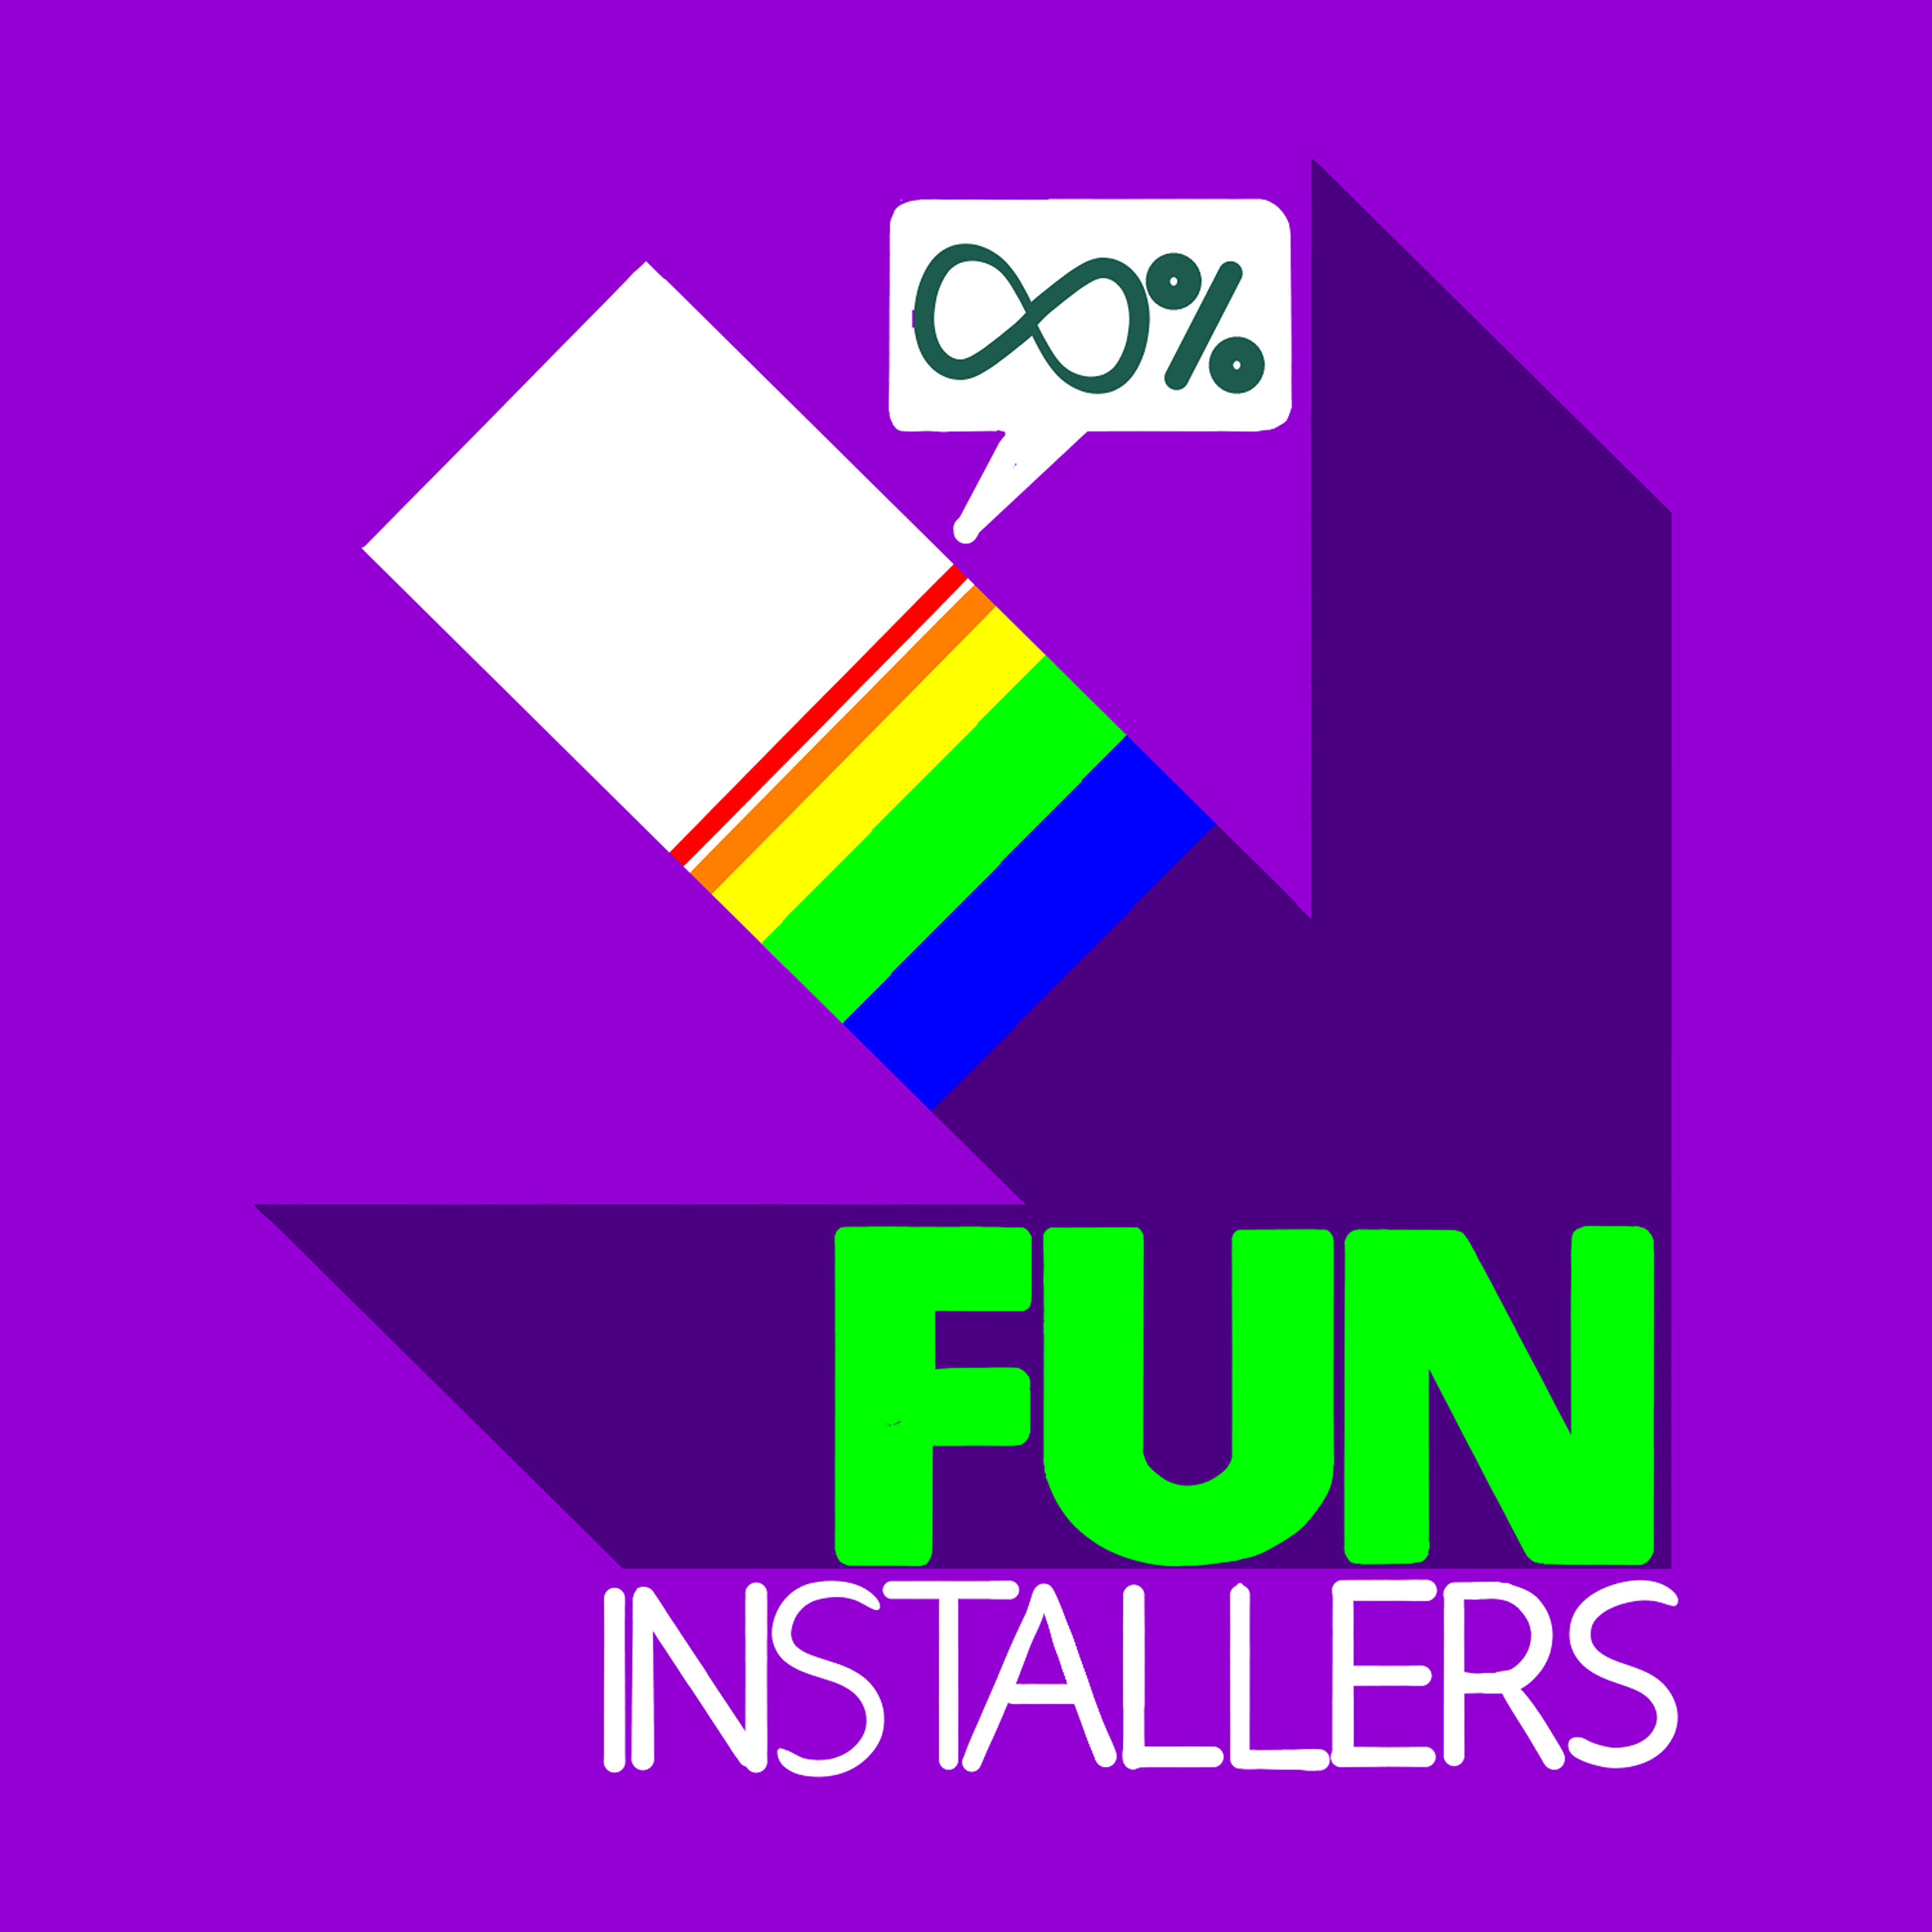 Funinstallers Announcements and sexy stuff!